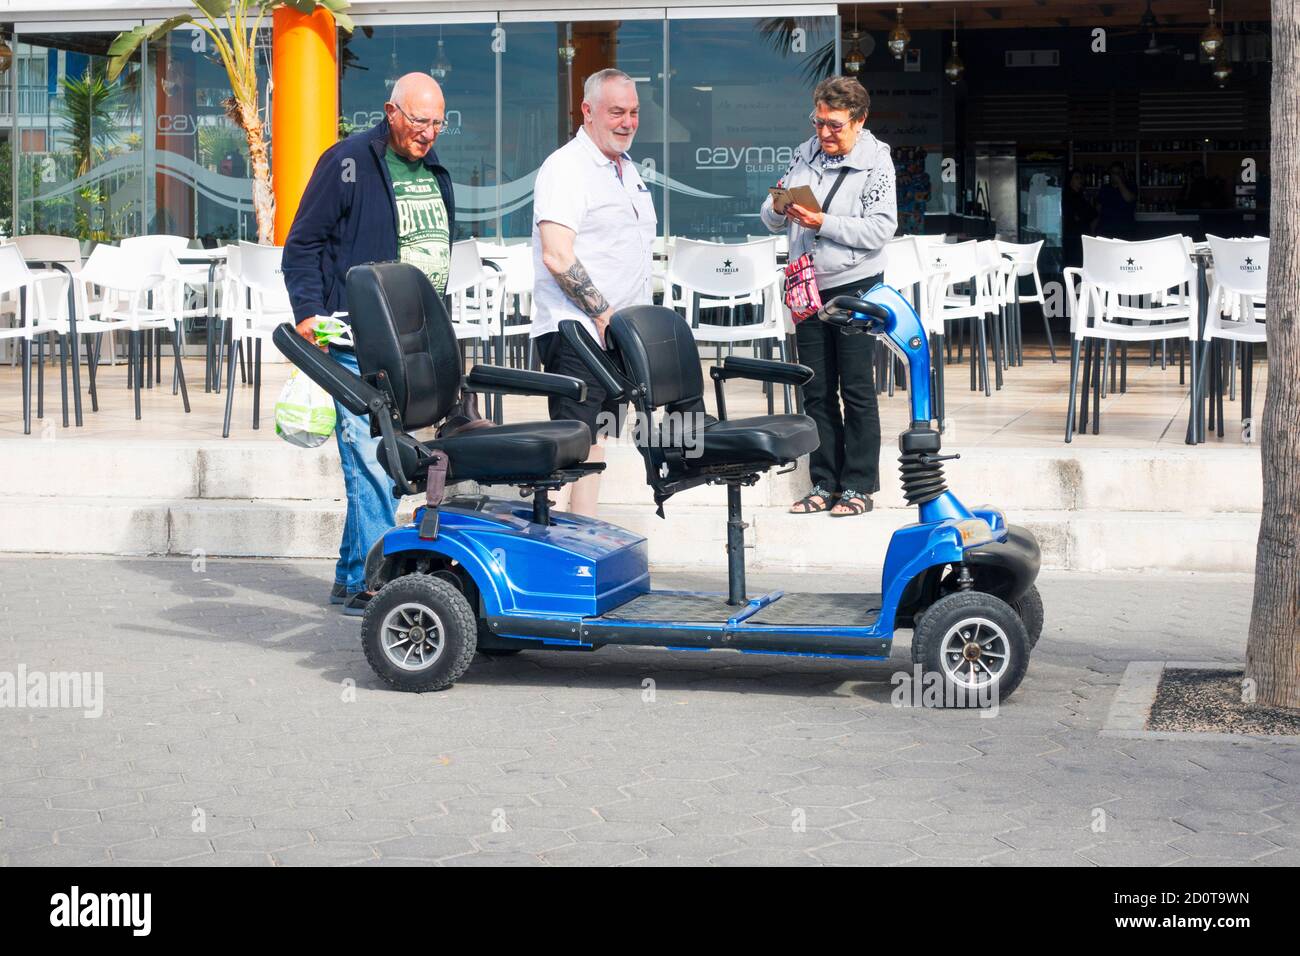 Benidorm, Spain - Holiday makers and disability scooter in Benidorm city  nea outdoors cafe Stock Photo - Alamy